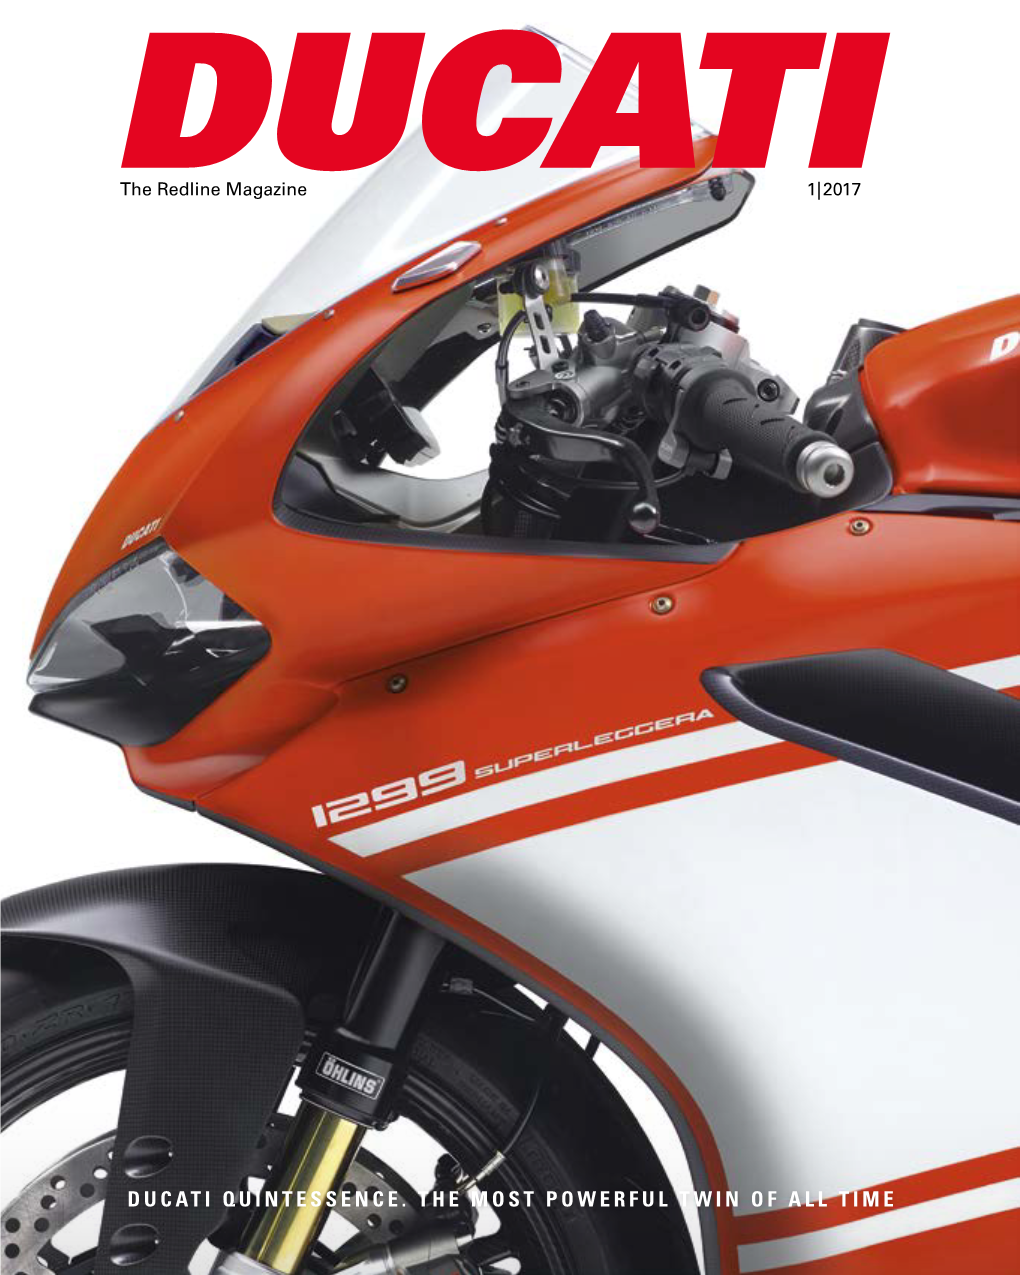 Ducati Quintessence. the Most Powerful Twin of All Time Welcome to Ducati